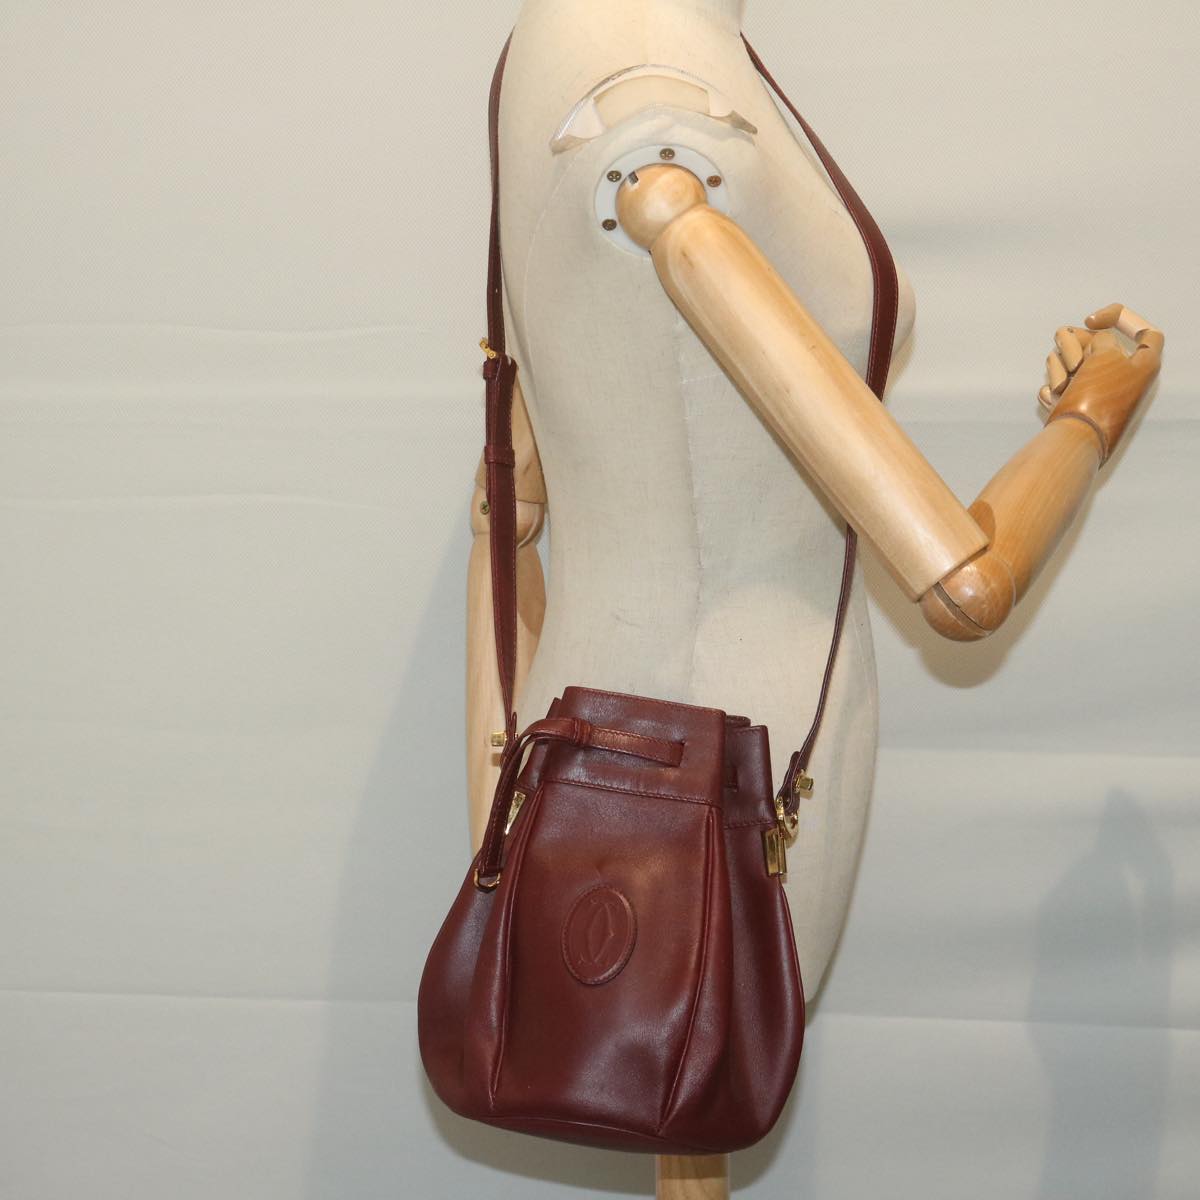 CARTIER Shoulder Bag Leather Wine Red Auth bs11743